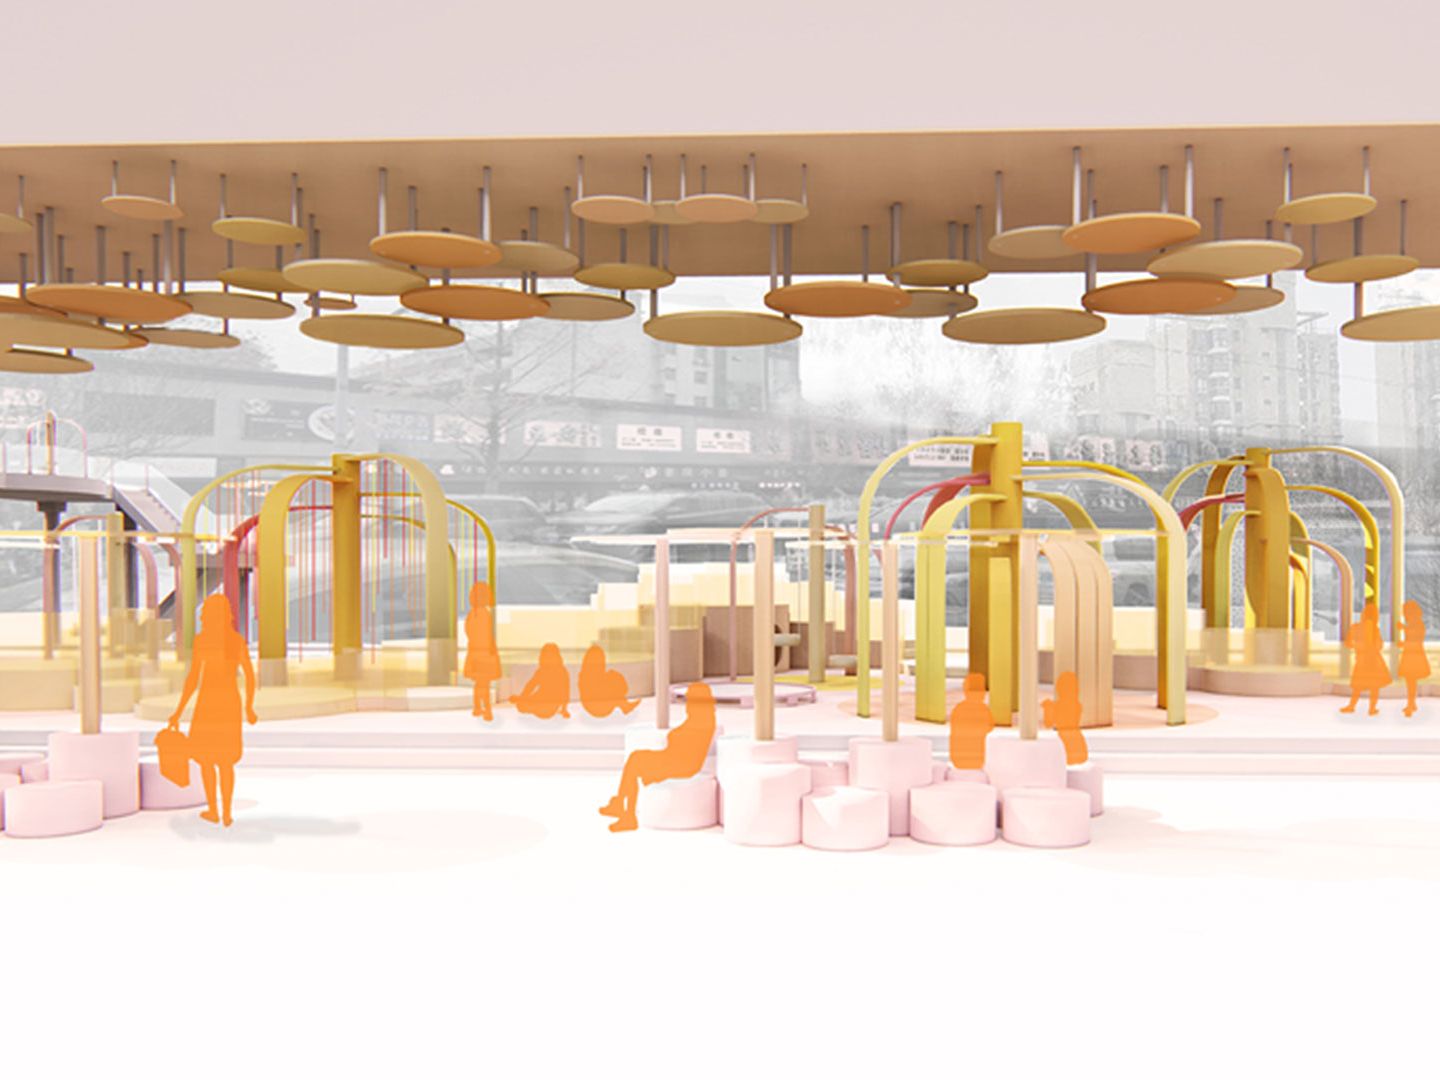 Image depicts a concept for 'The Candy Playground', a child's play area.